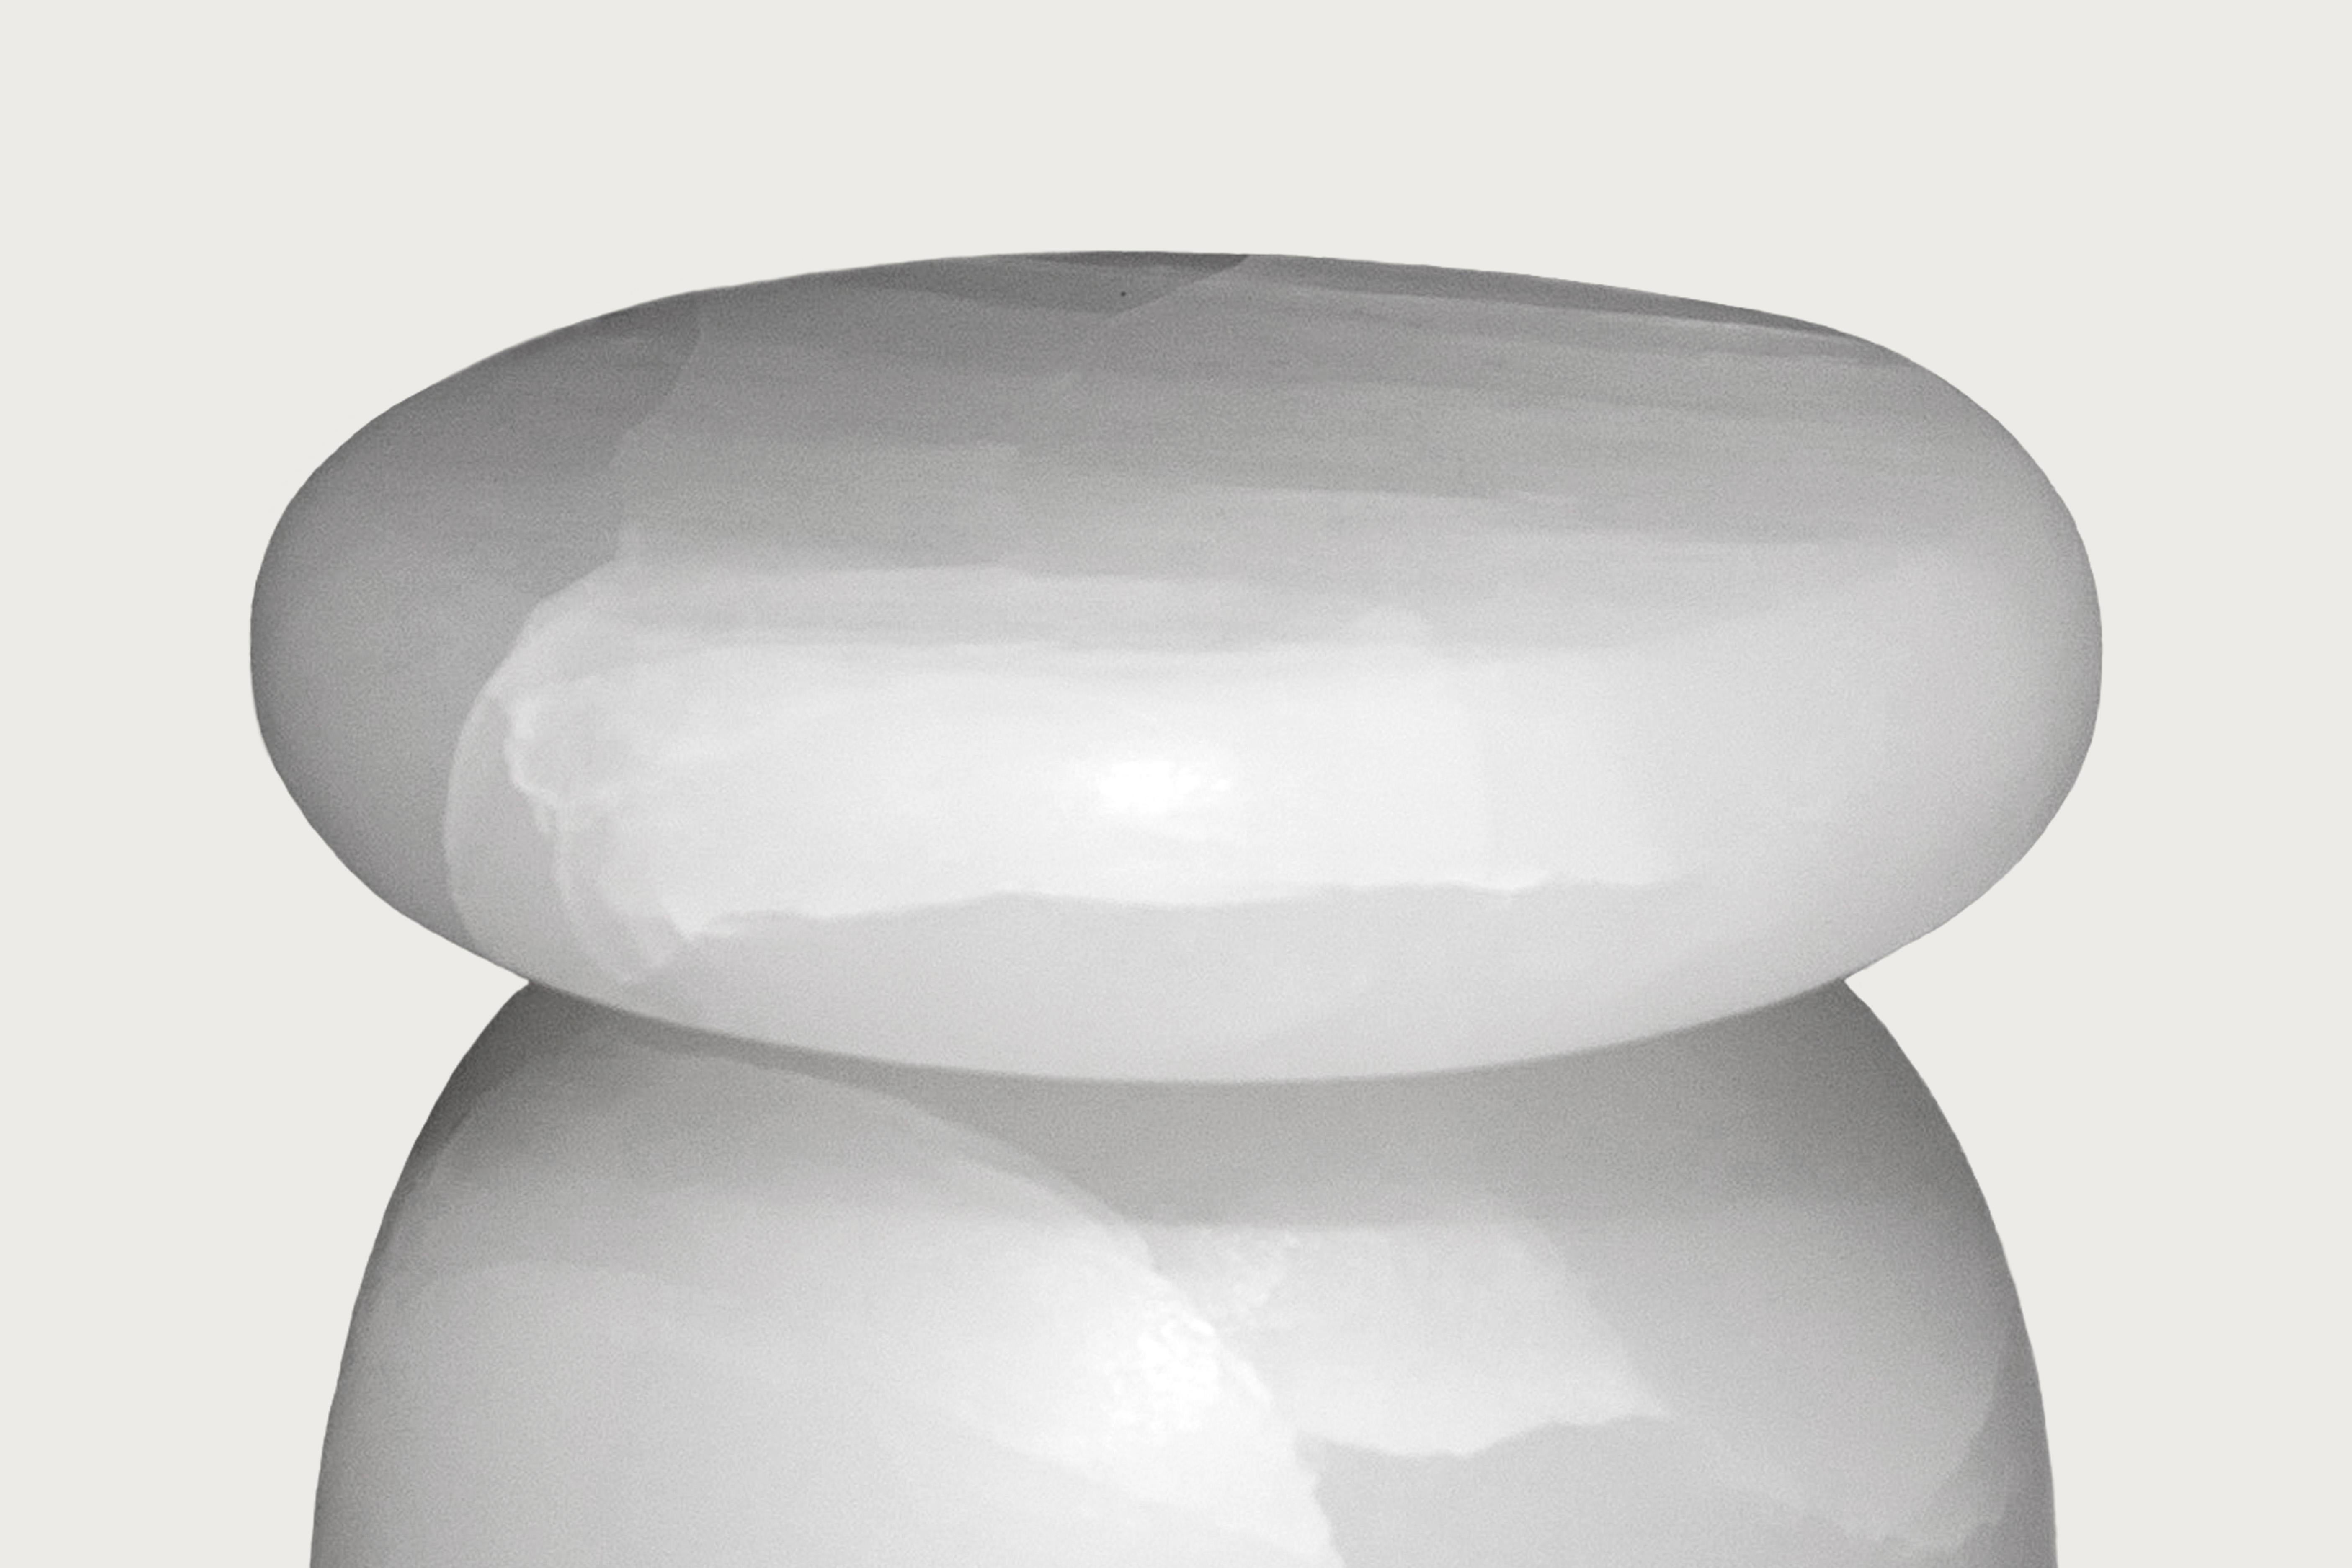 Cult stool / side table; a hand sculpted stone from an incredibly particular stone; Mexican Ice Onyx, remits to primal sculptural-architectural language while displaying materials in a modernist manner. The piece allows for the specificity of the